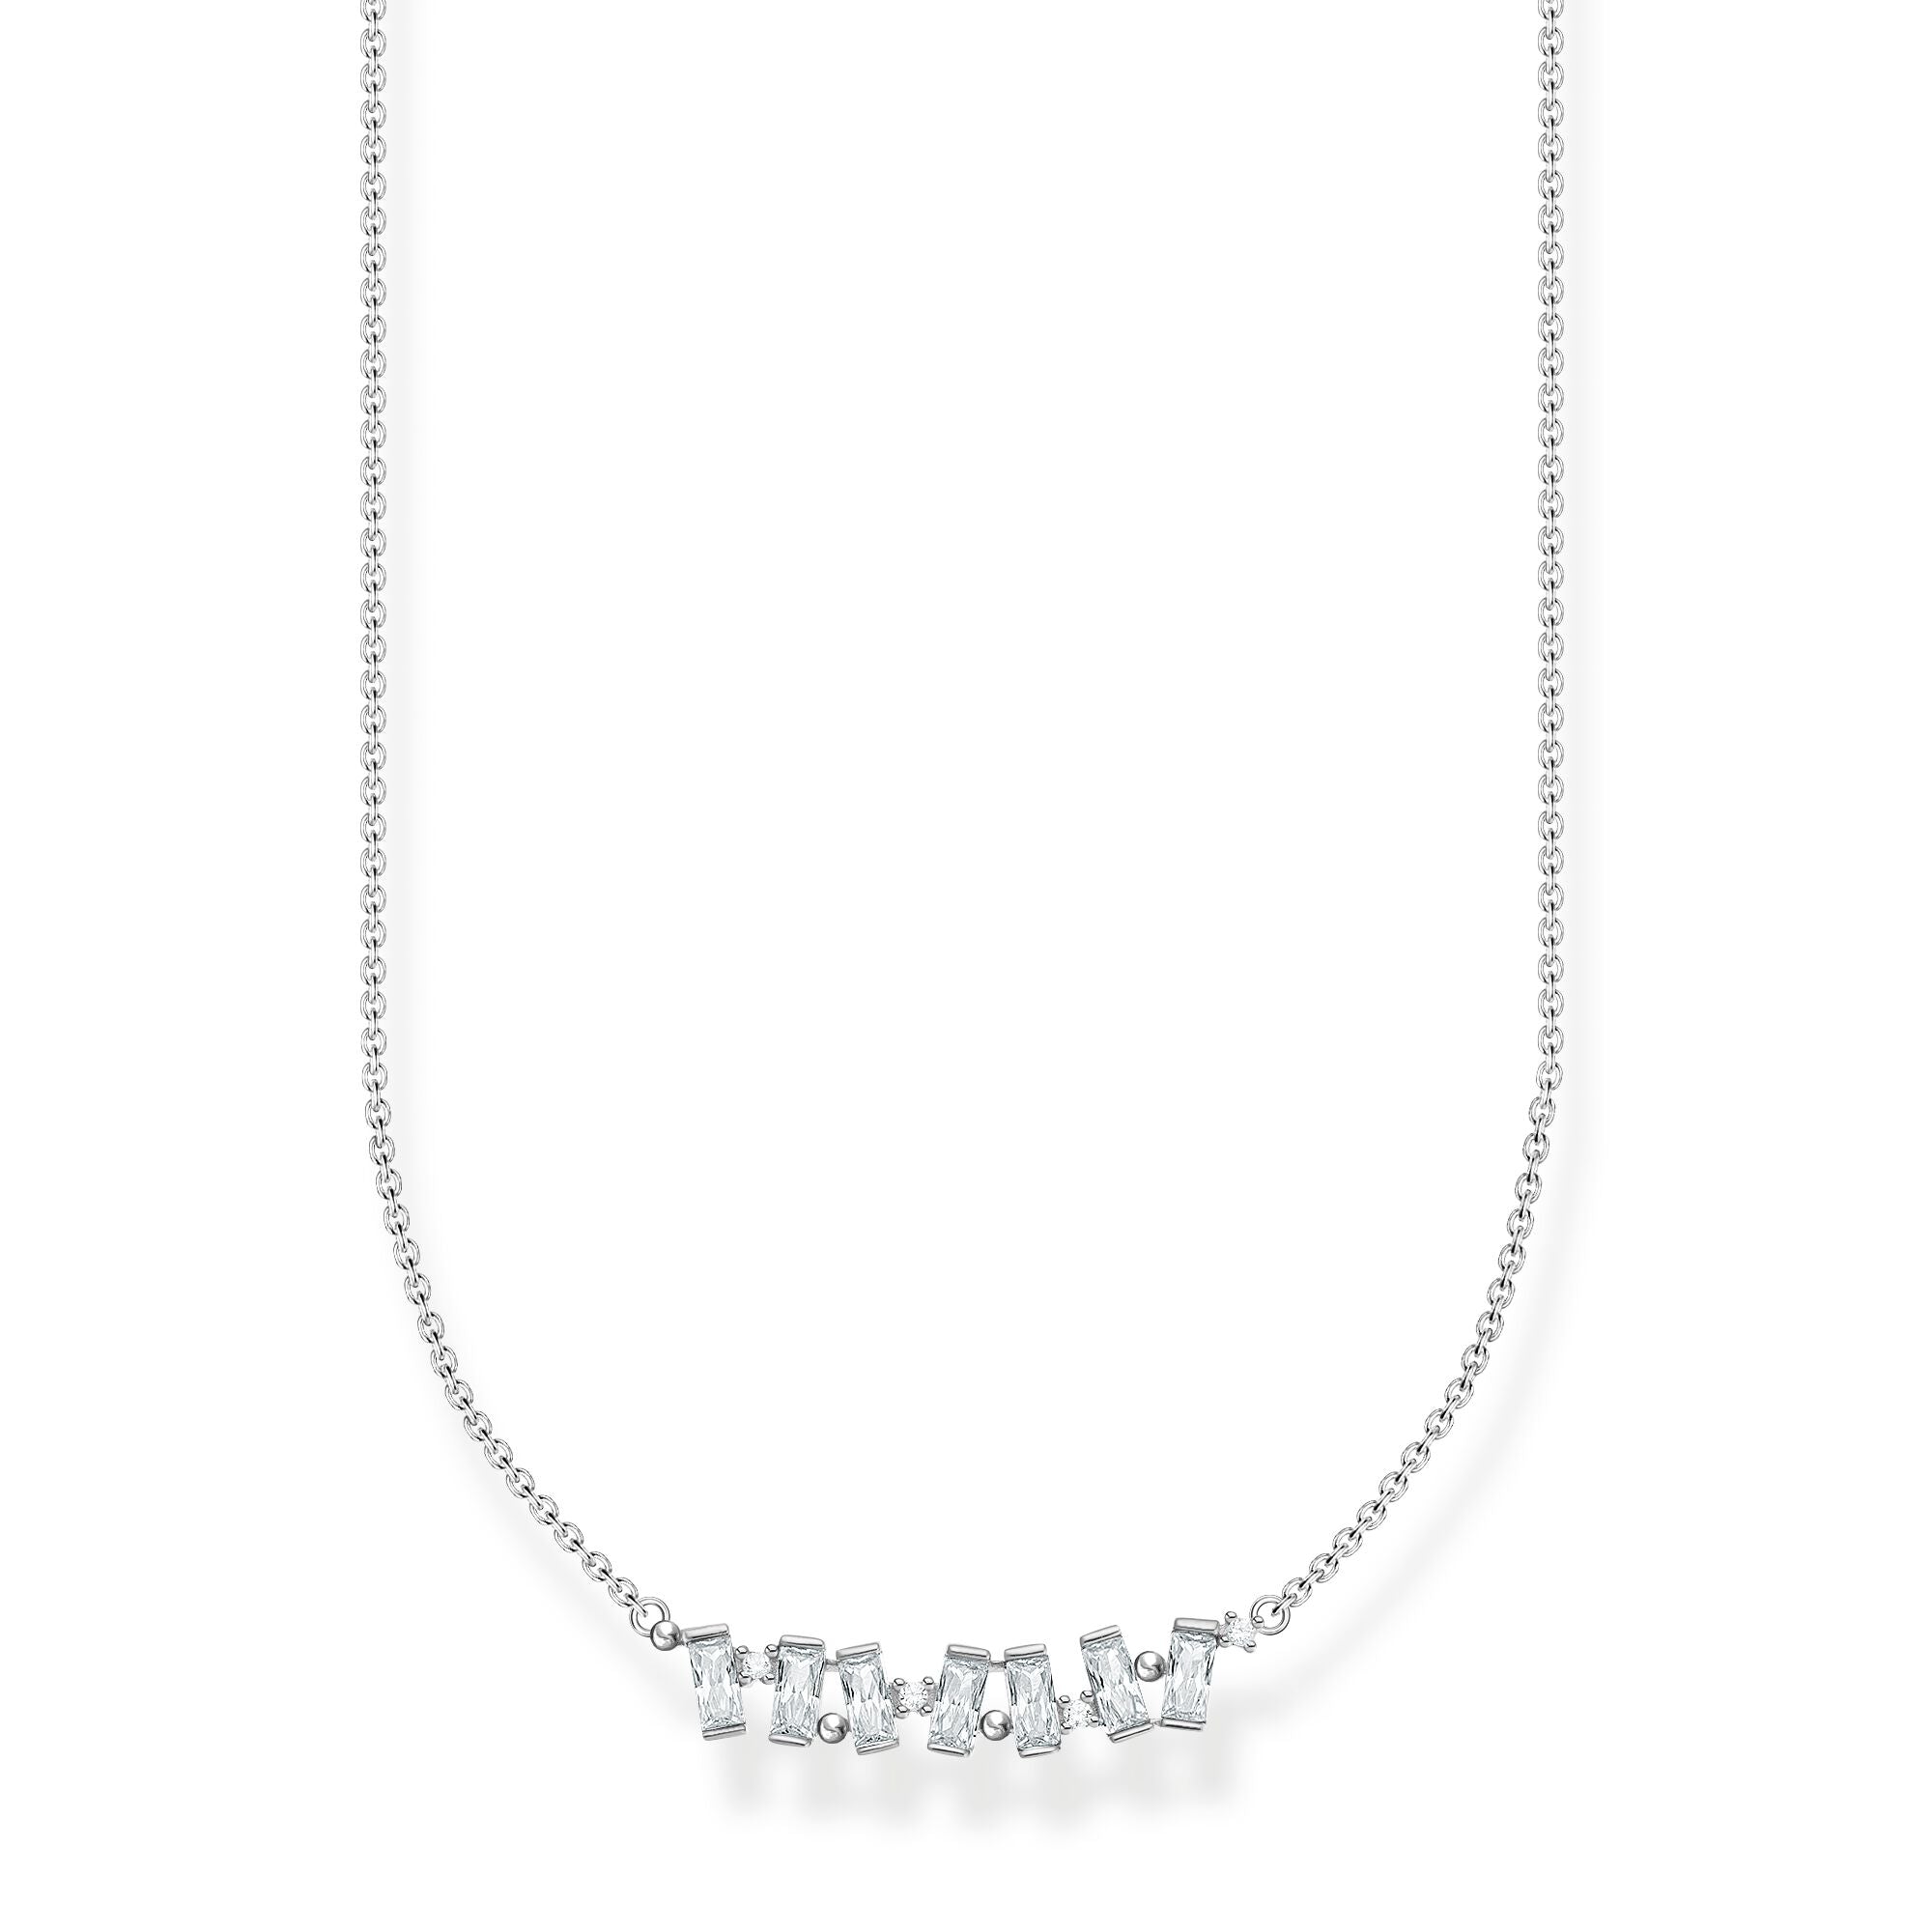 White Baguette Stone Necklace - Silver